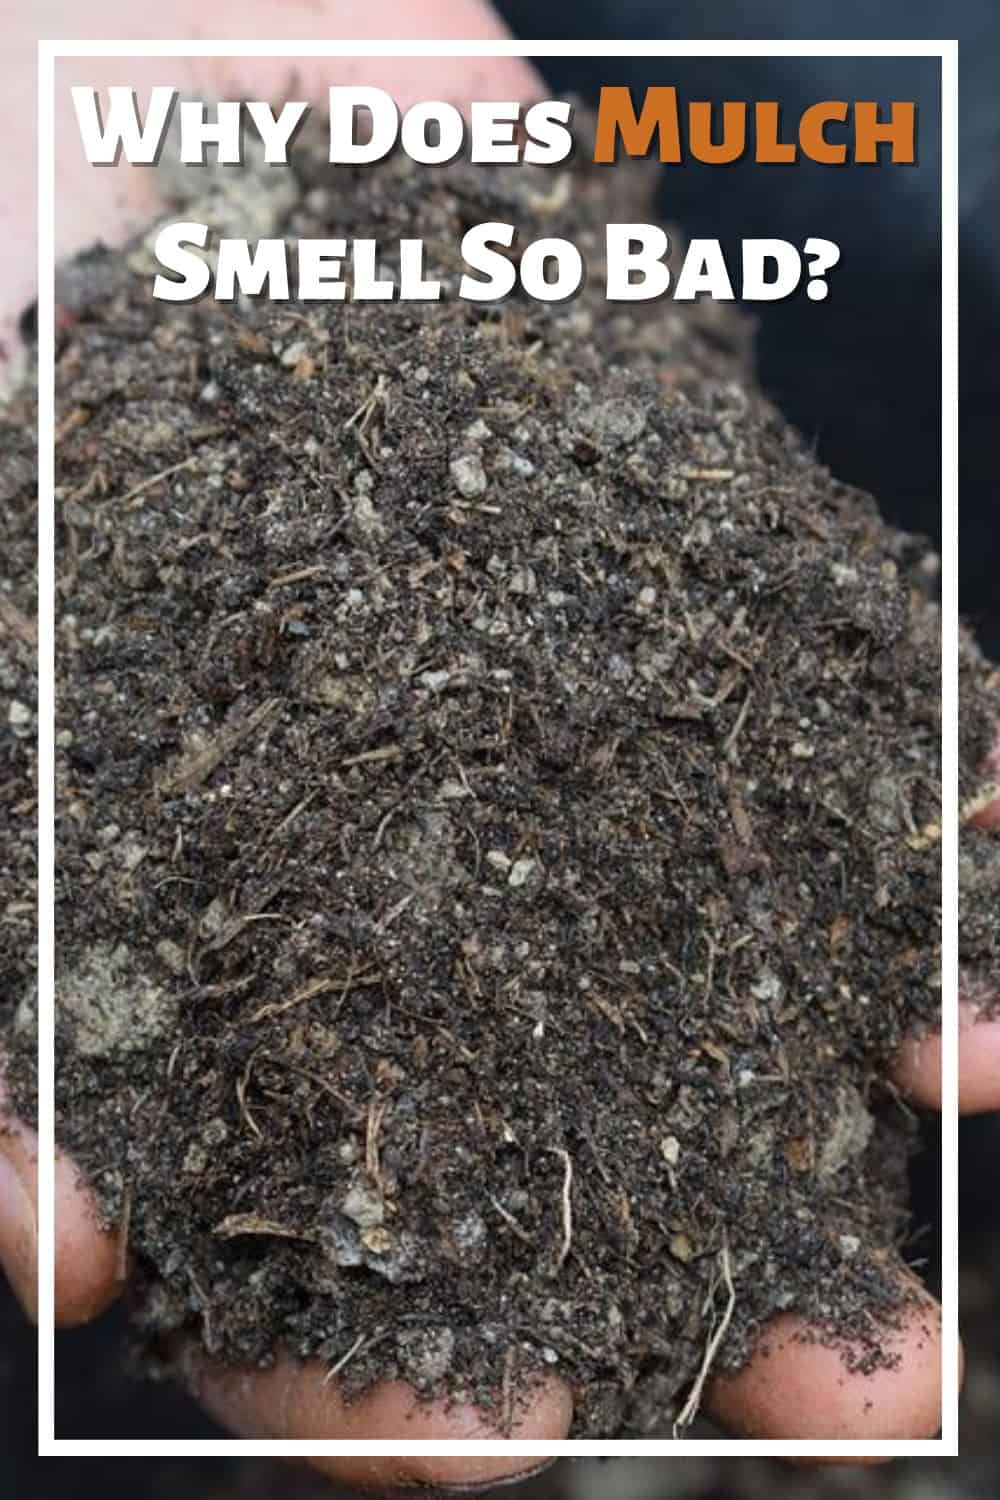 Mulch smells like manure when it has begun to decompose